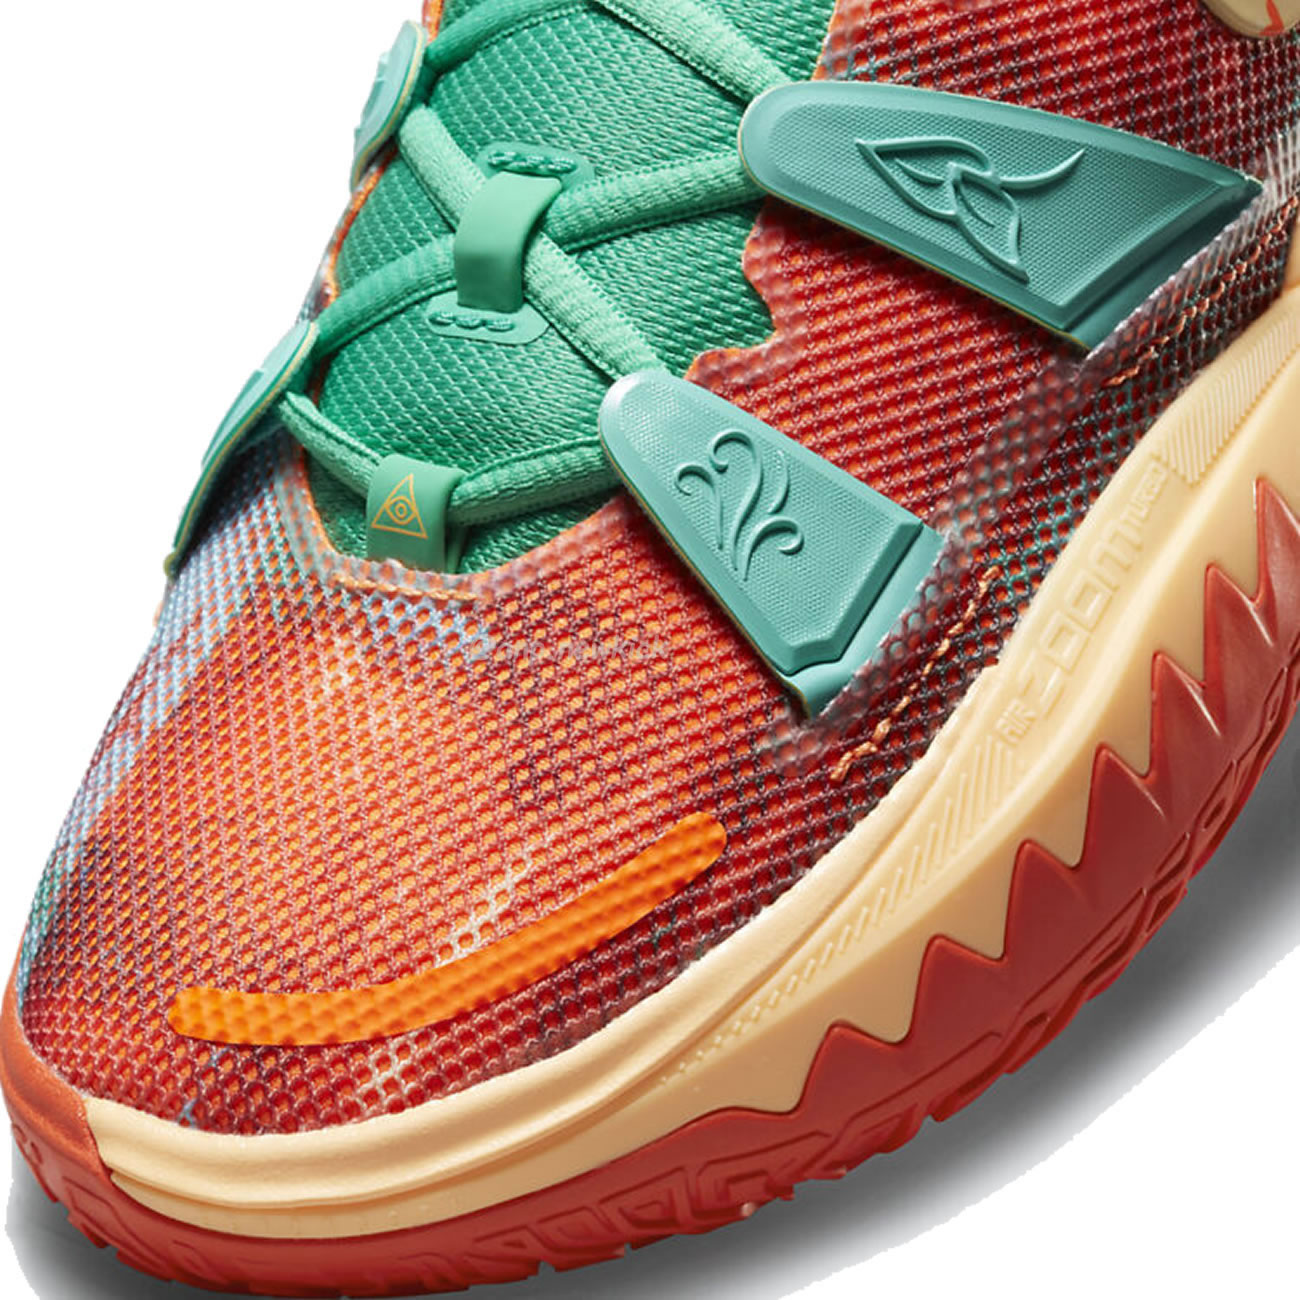 Nike Kyrie 7 Sneaker Room Fire And Water Do5360 900 (8) - newkick.org